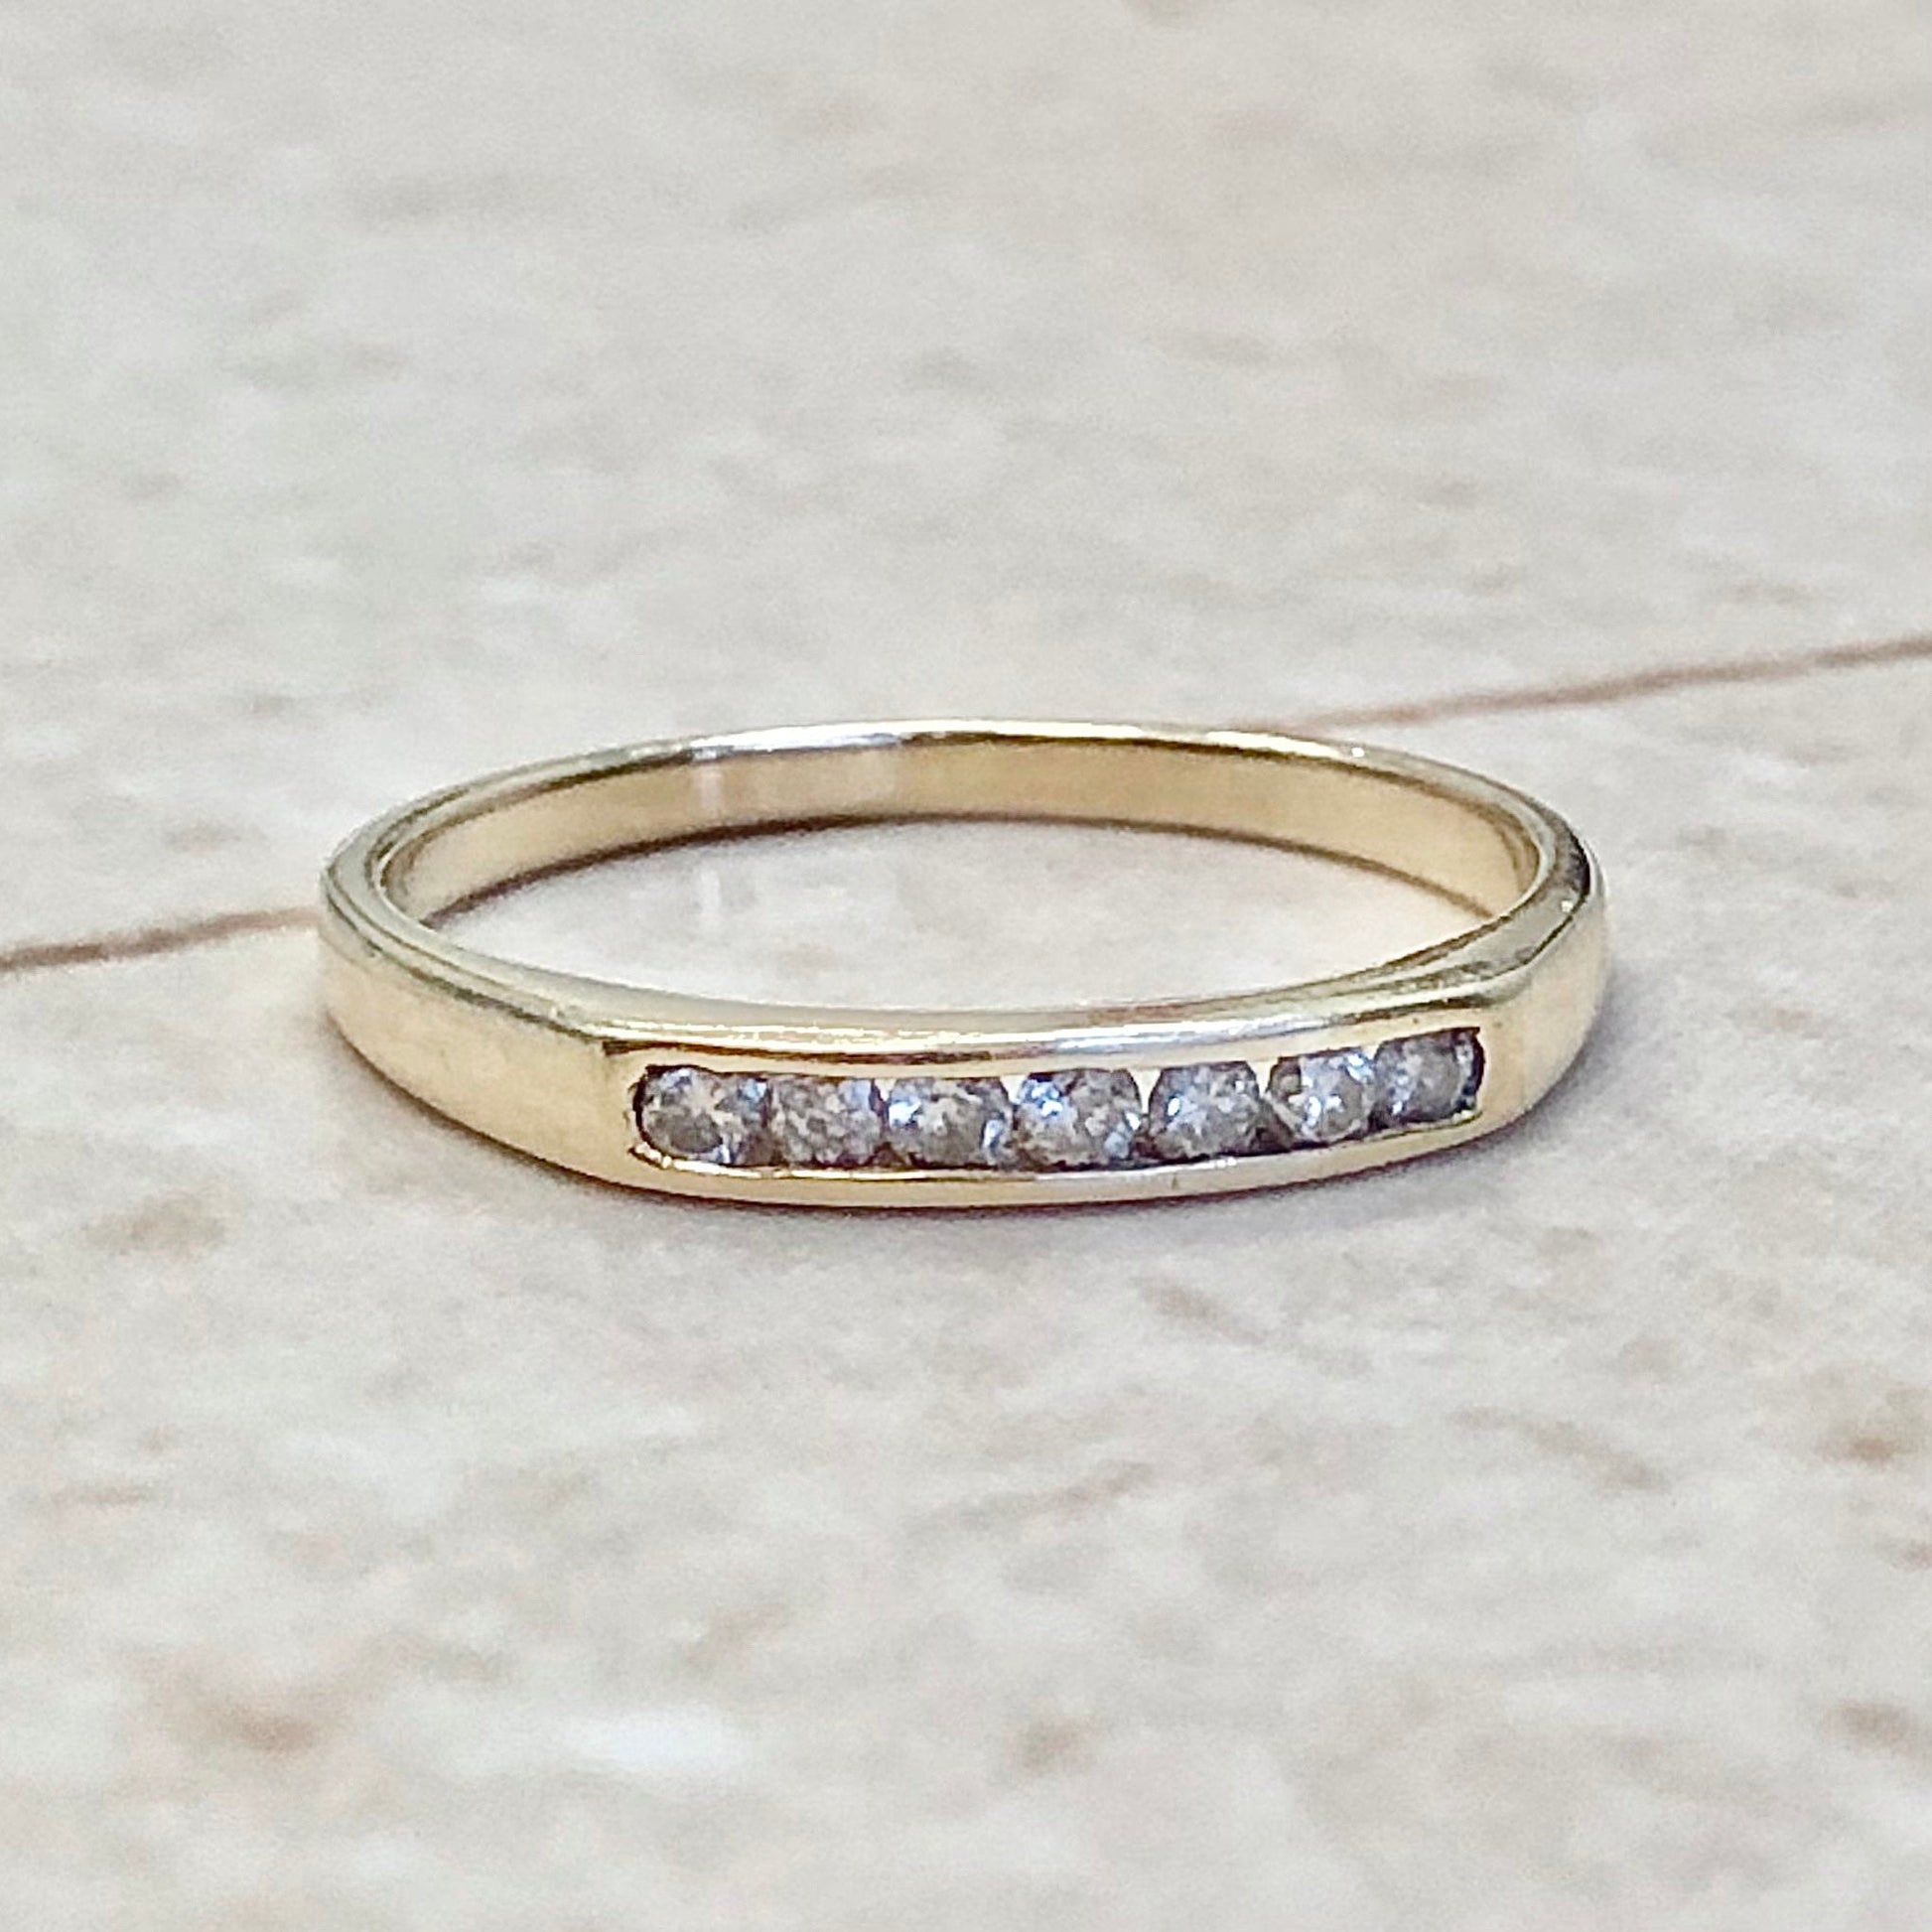 14 Karat Yellow Gold Diamond Band Ring 0.15 CTTW - Diamond Stackable Ring - Anniversary Ring - Valentine’s Day Gift - Size 6.75